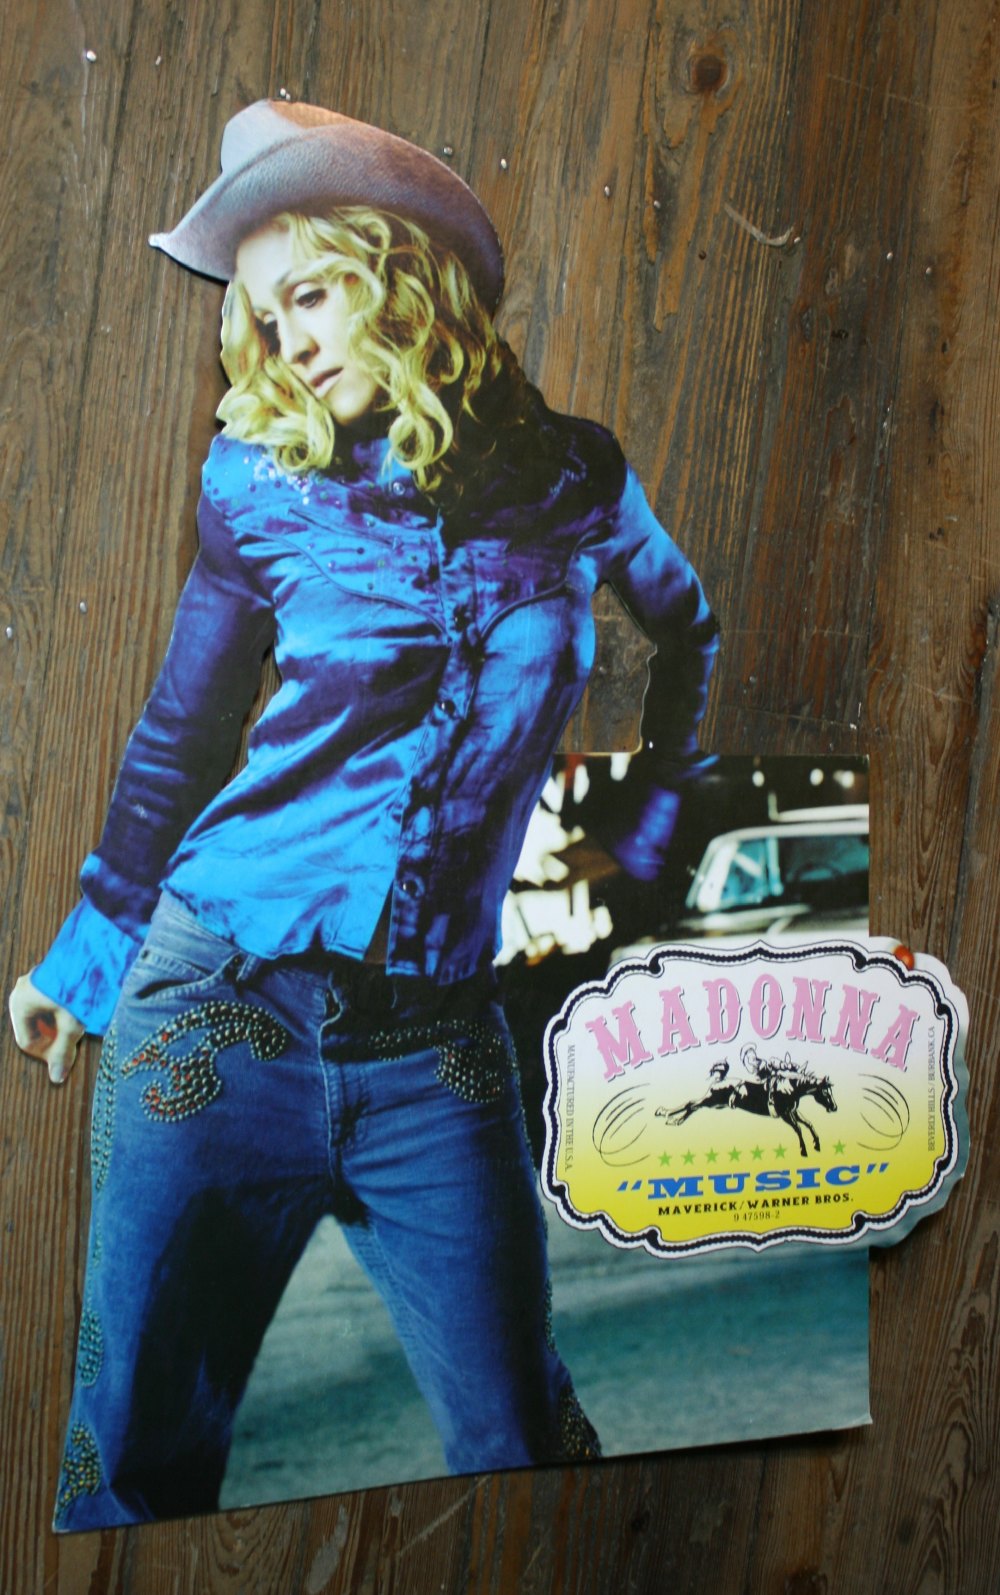 MADONNA - collection of 3 x roller banners and a cardboard display to promote her eighth studio